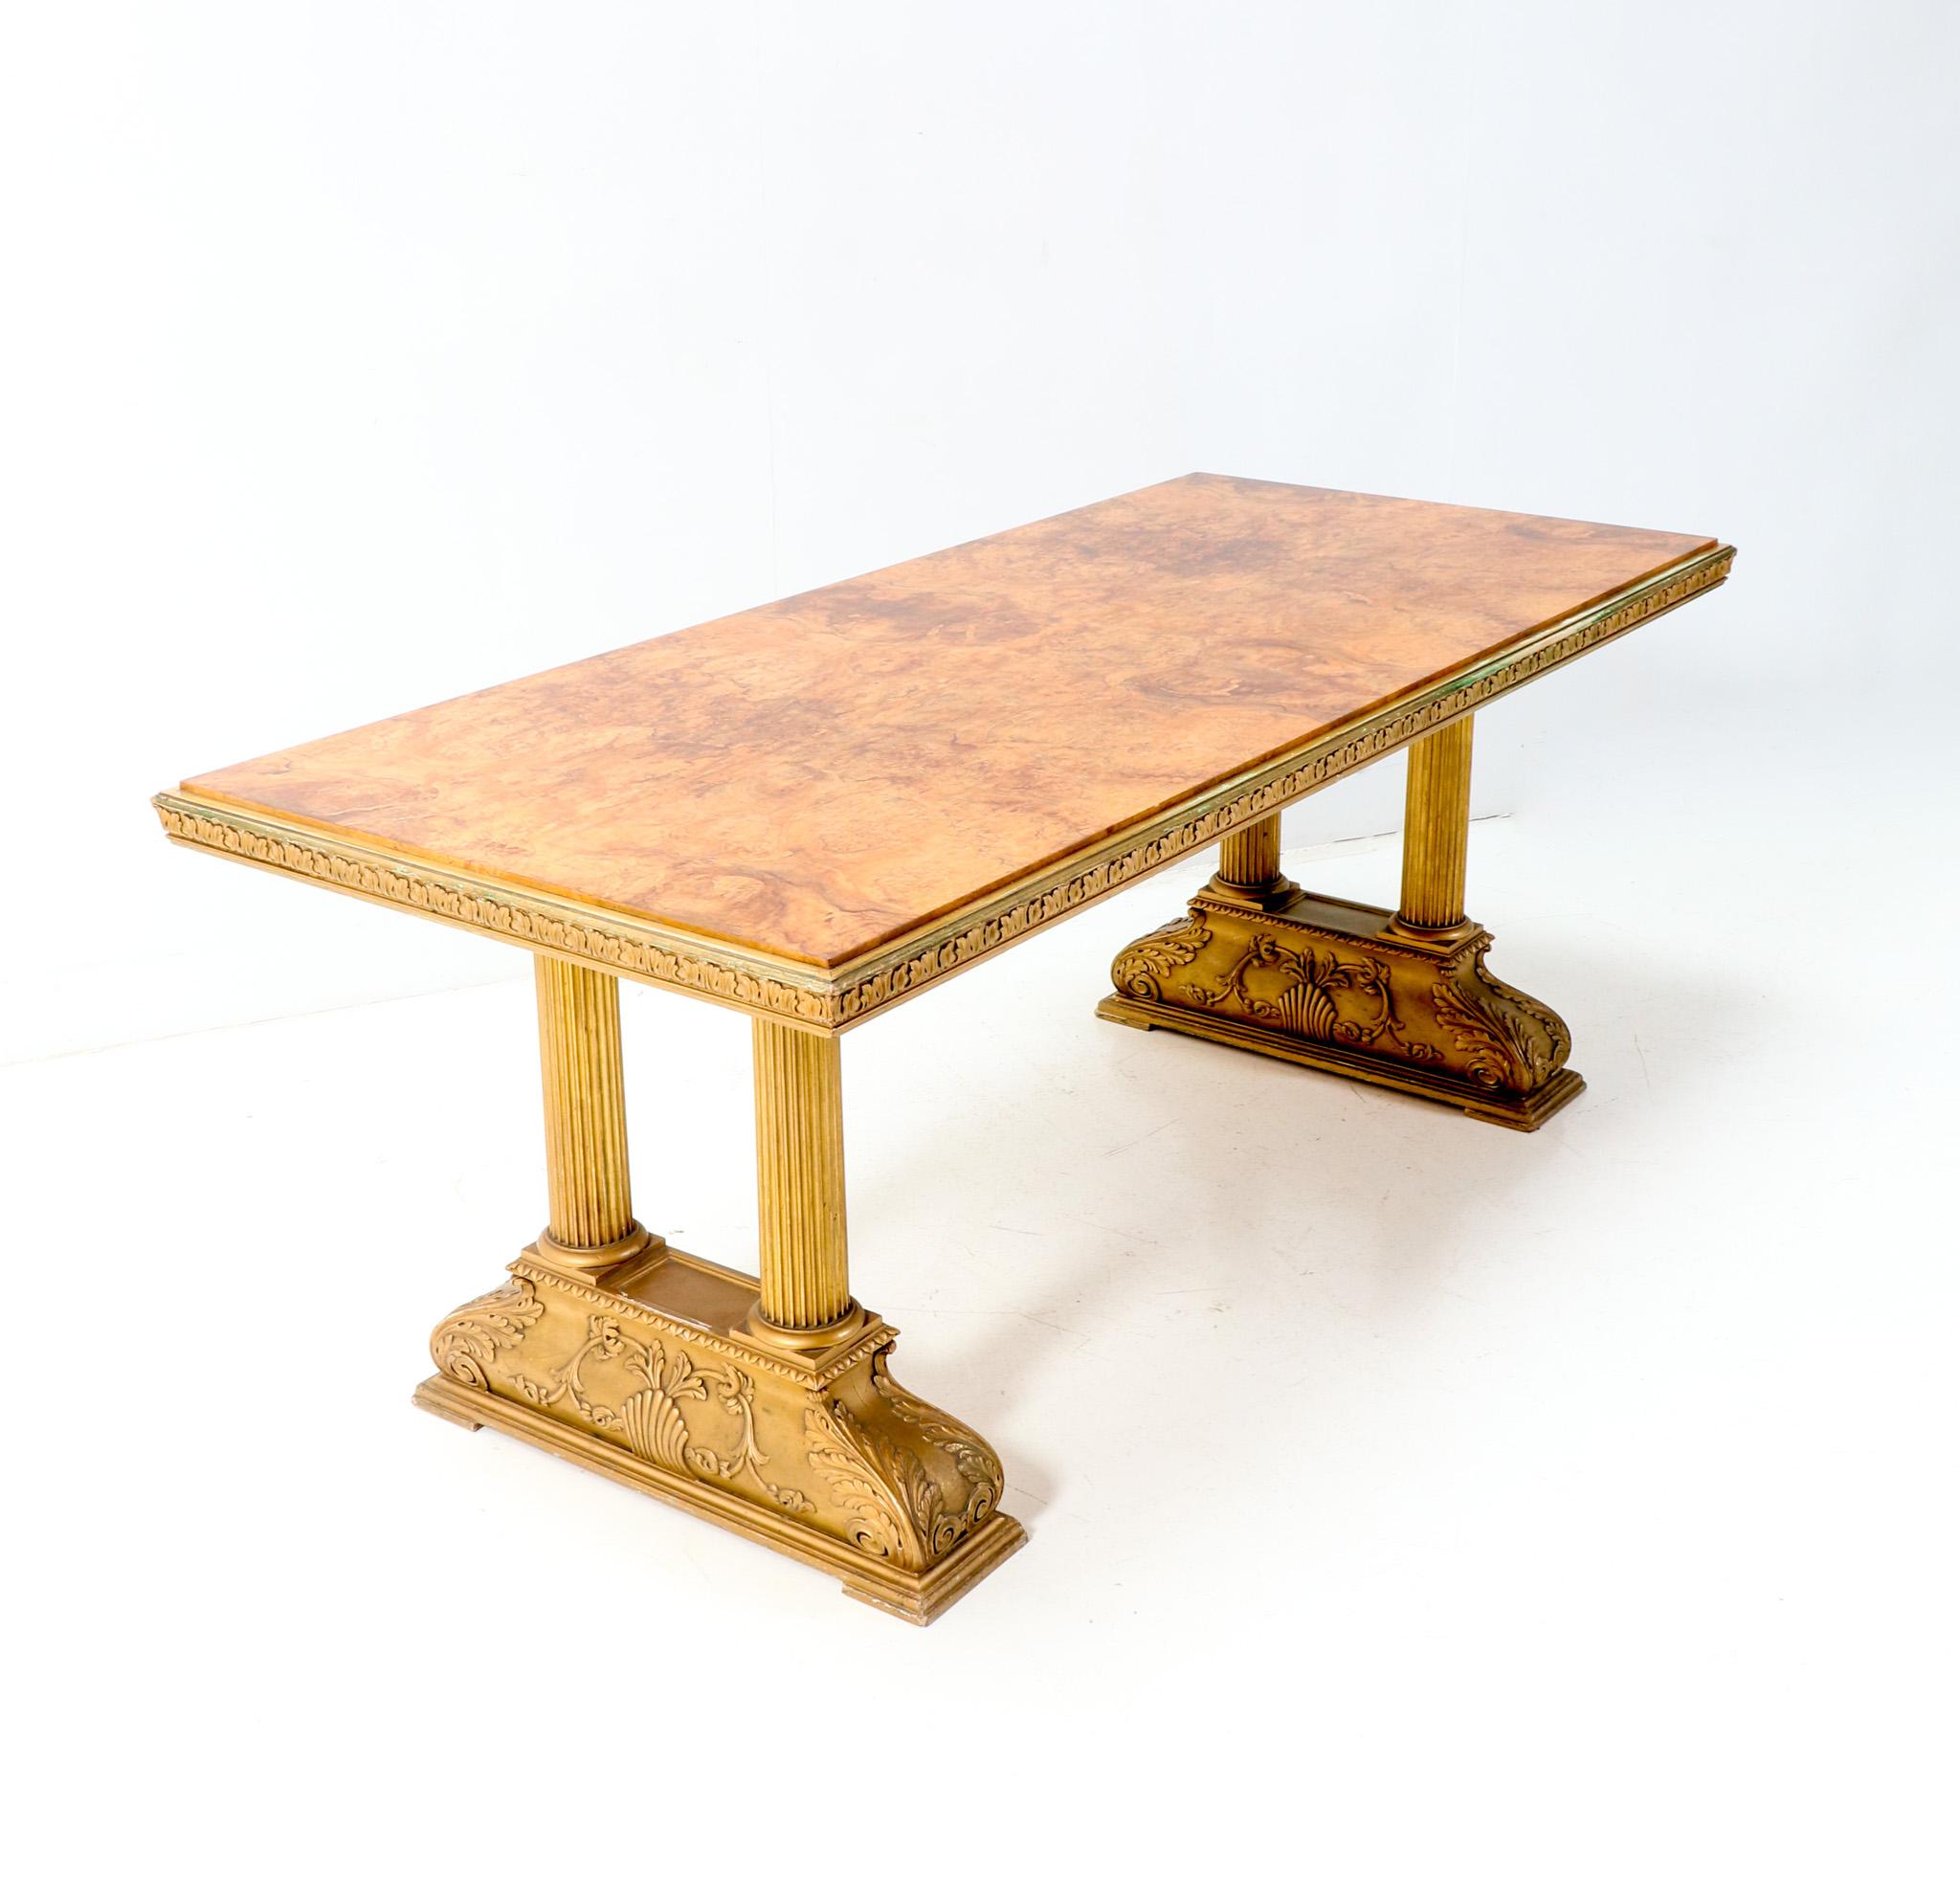 Gilt Dining Room Table Caesar by Axel Einar Hjorth with Original Extensions, 1920s For Sale